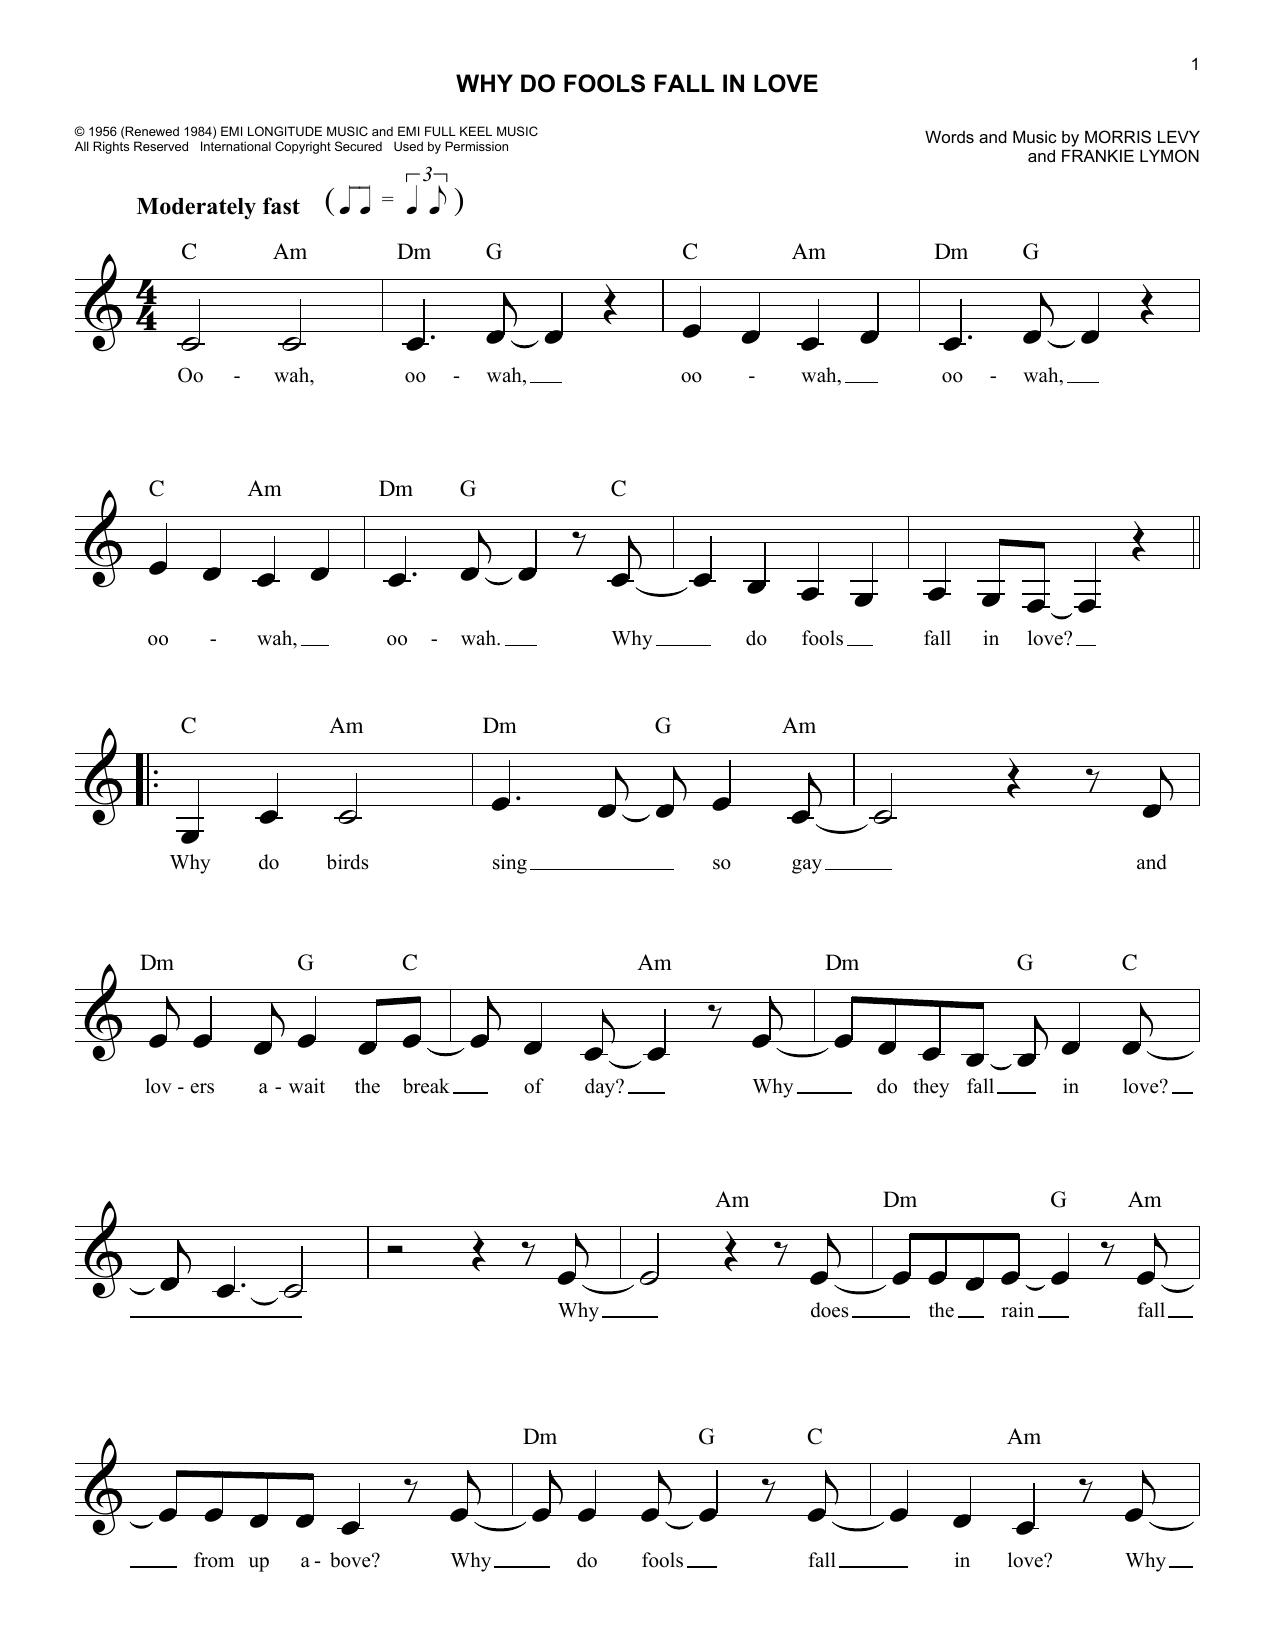 Frankie Lymon & The Teenagers Why Do Fools Fall In Love sheet music notes and chords. Download Printable PDF.